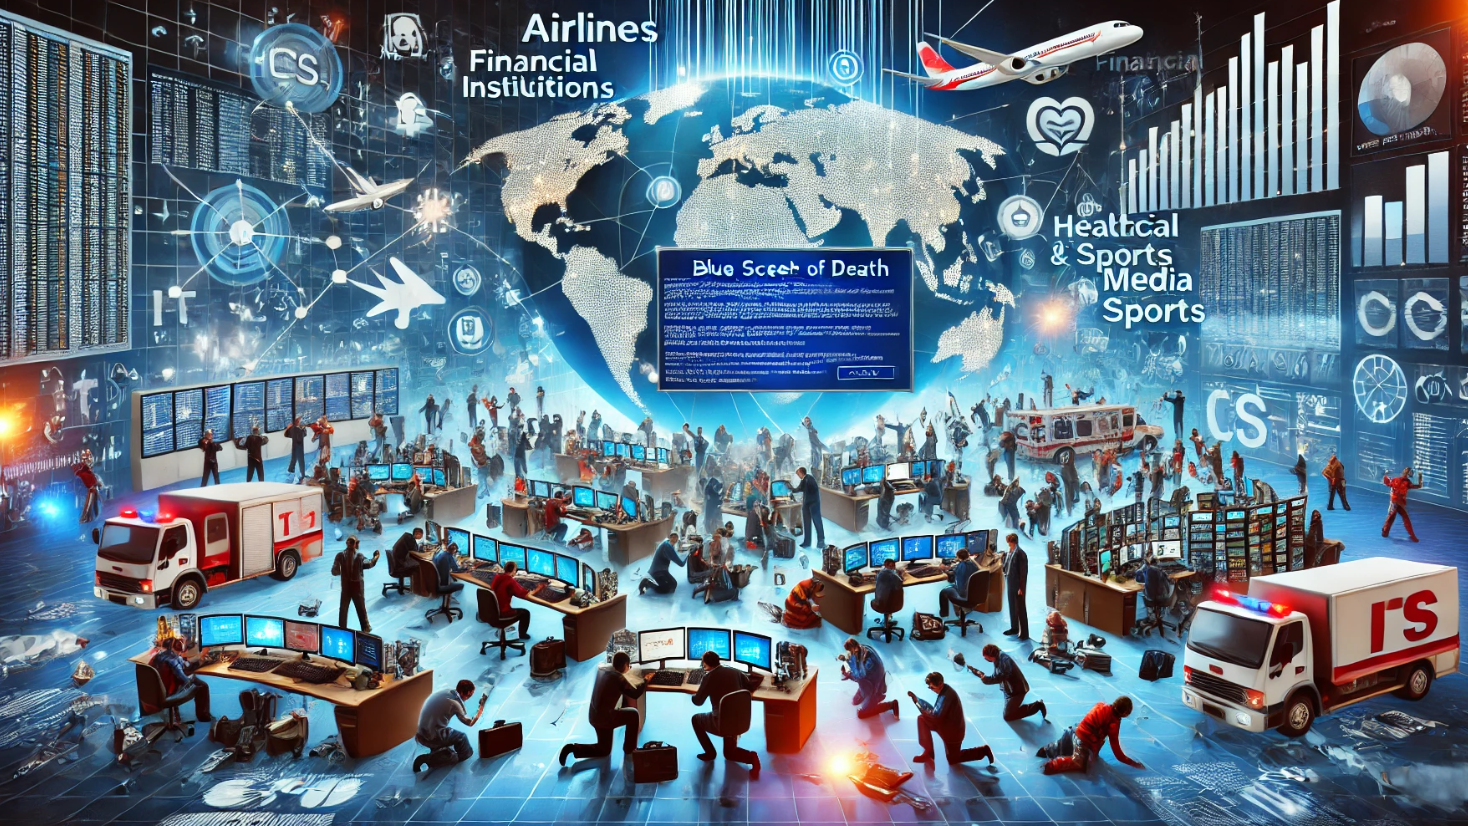 A chaotic scene illustrating a global IT incident with various industries affected, showing the blue screen of death on a computer, technicians working frantically, and a world map highlighting the spread of the disruption